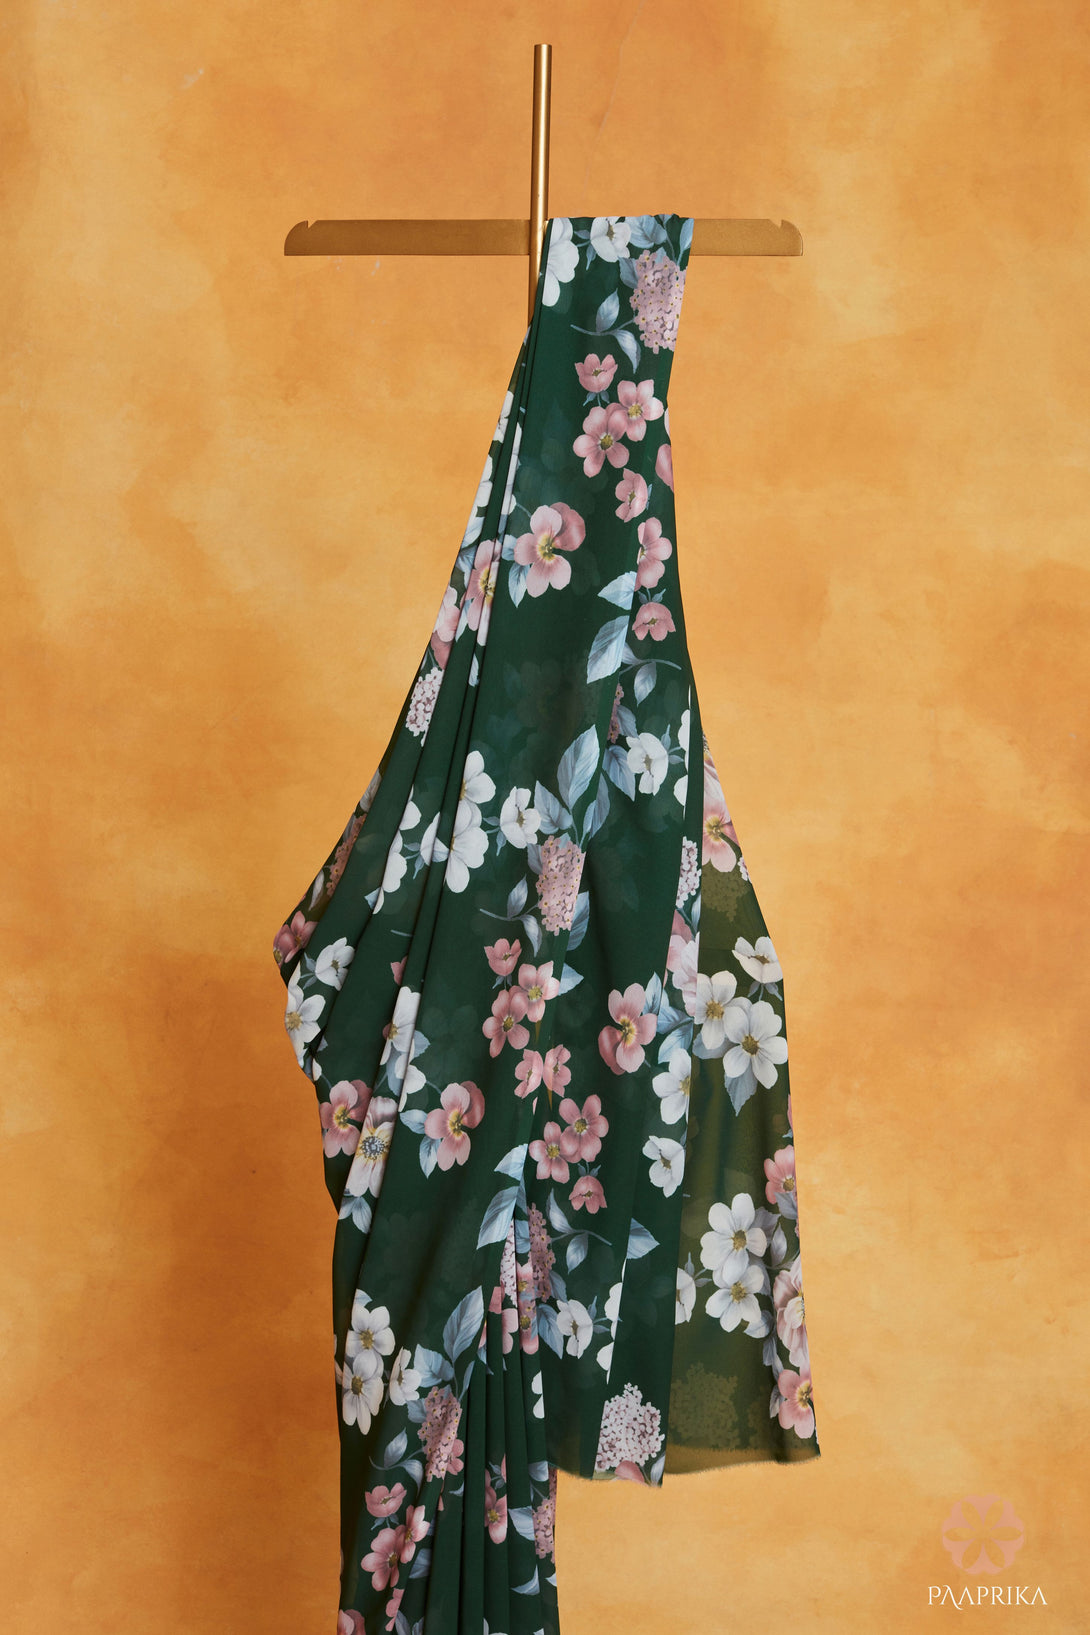 Beautiful drape of the Trendy Bottle Green Floral Printed Georgette Saree, staying fashion-forward with the essence of nature's bloom. The lightweight georgette fabric drapes effortlessly, showcasing the captivating floral prints.